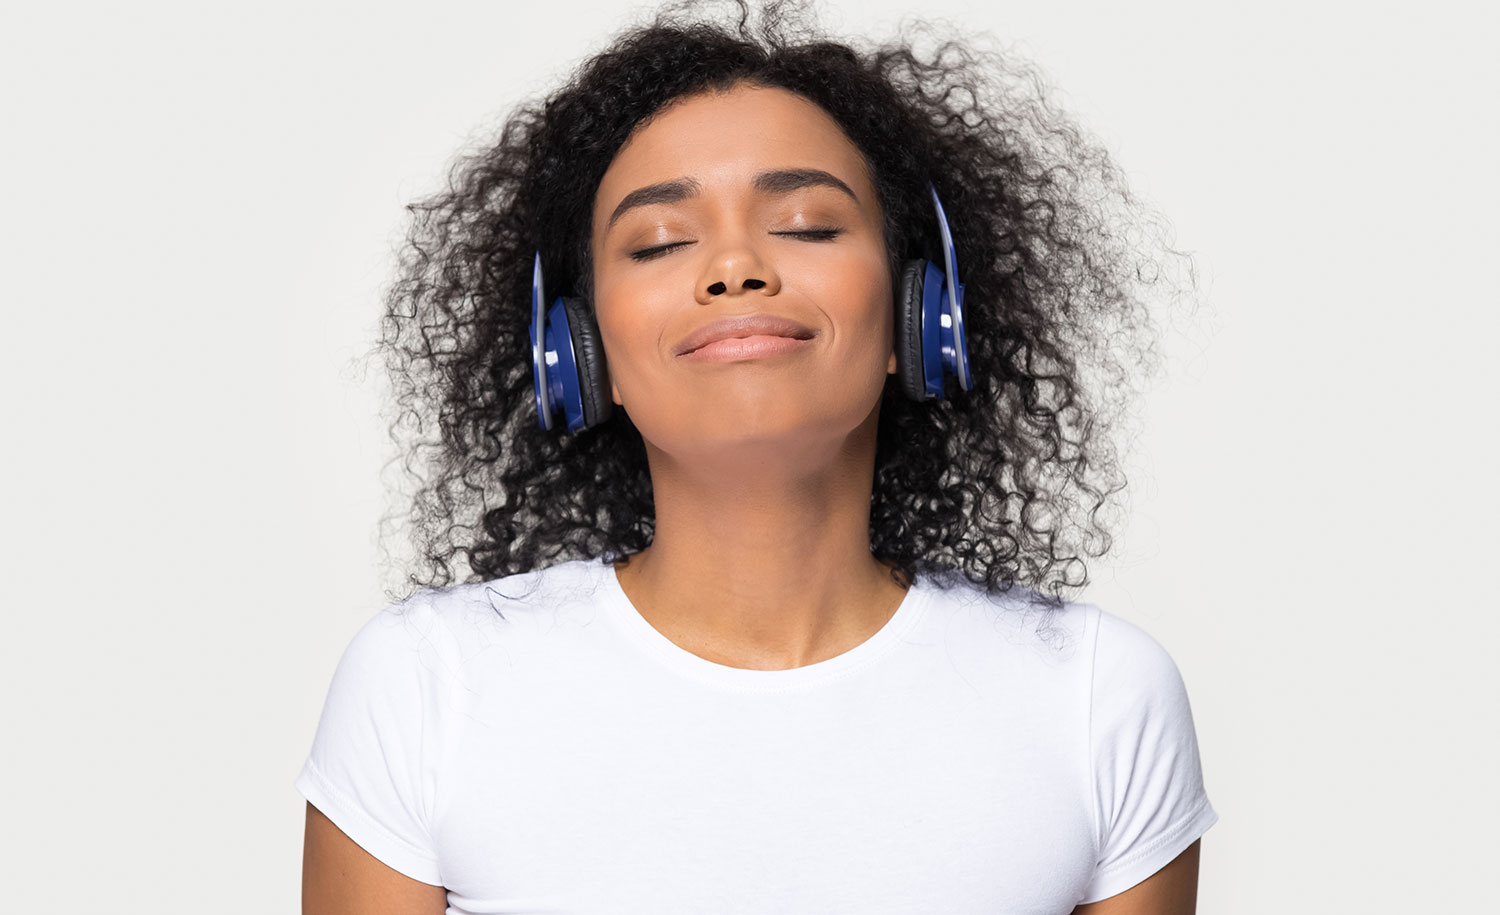 A highly sensitive person listening to music